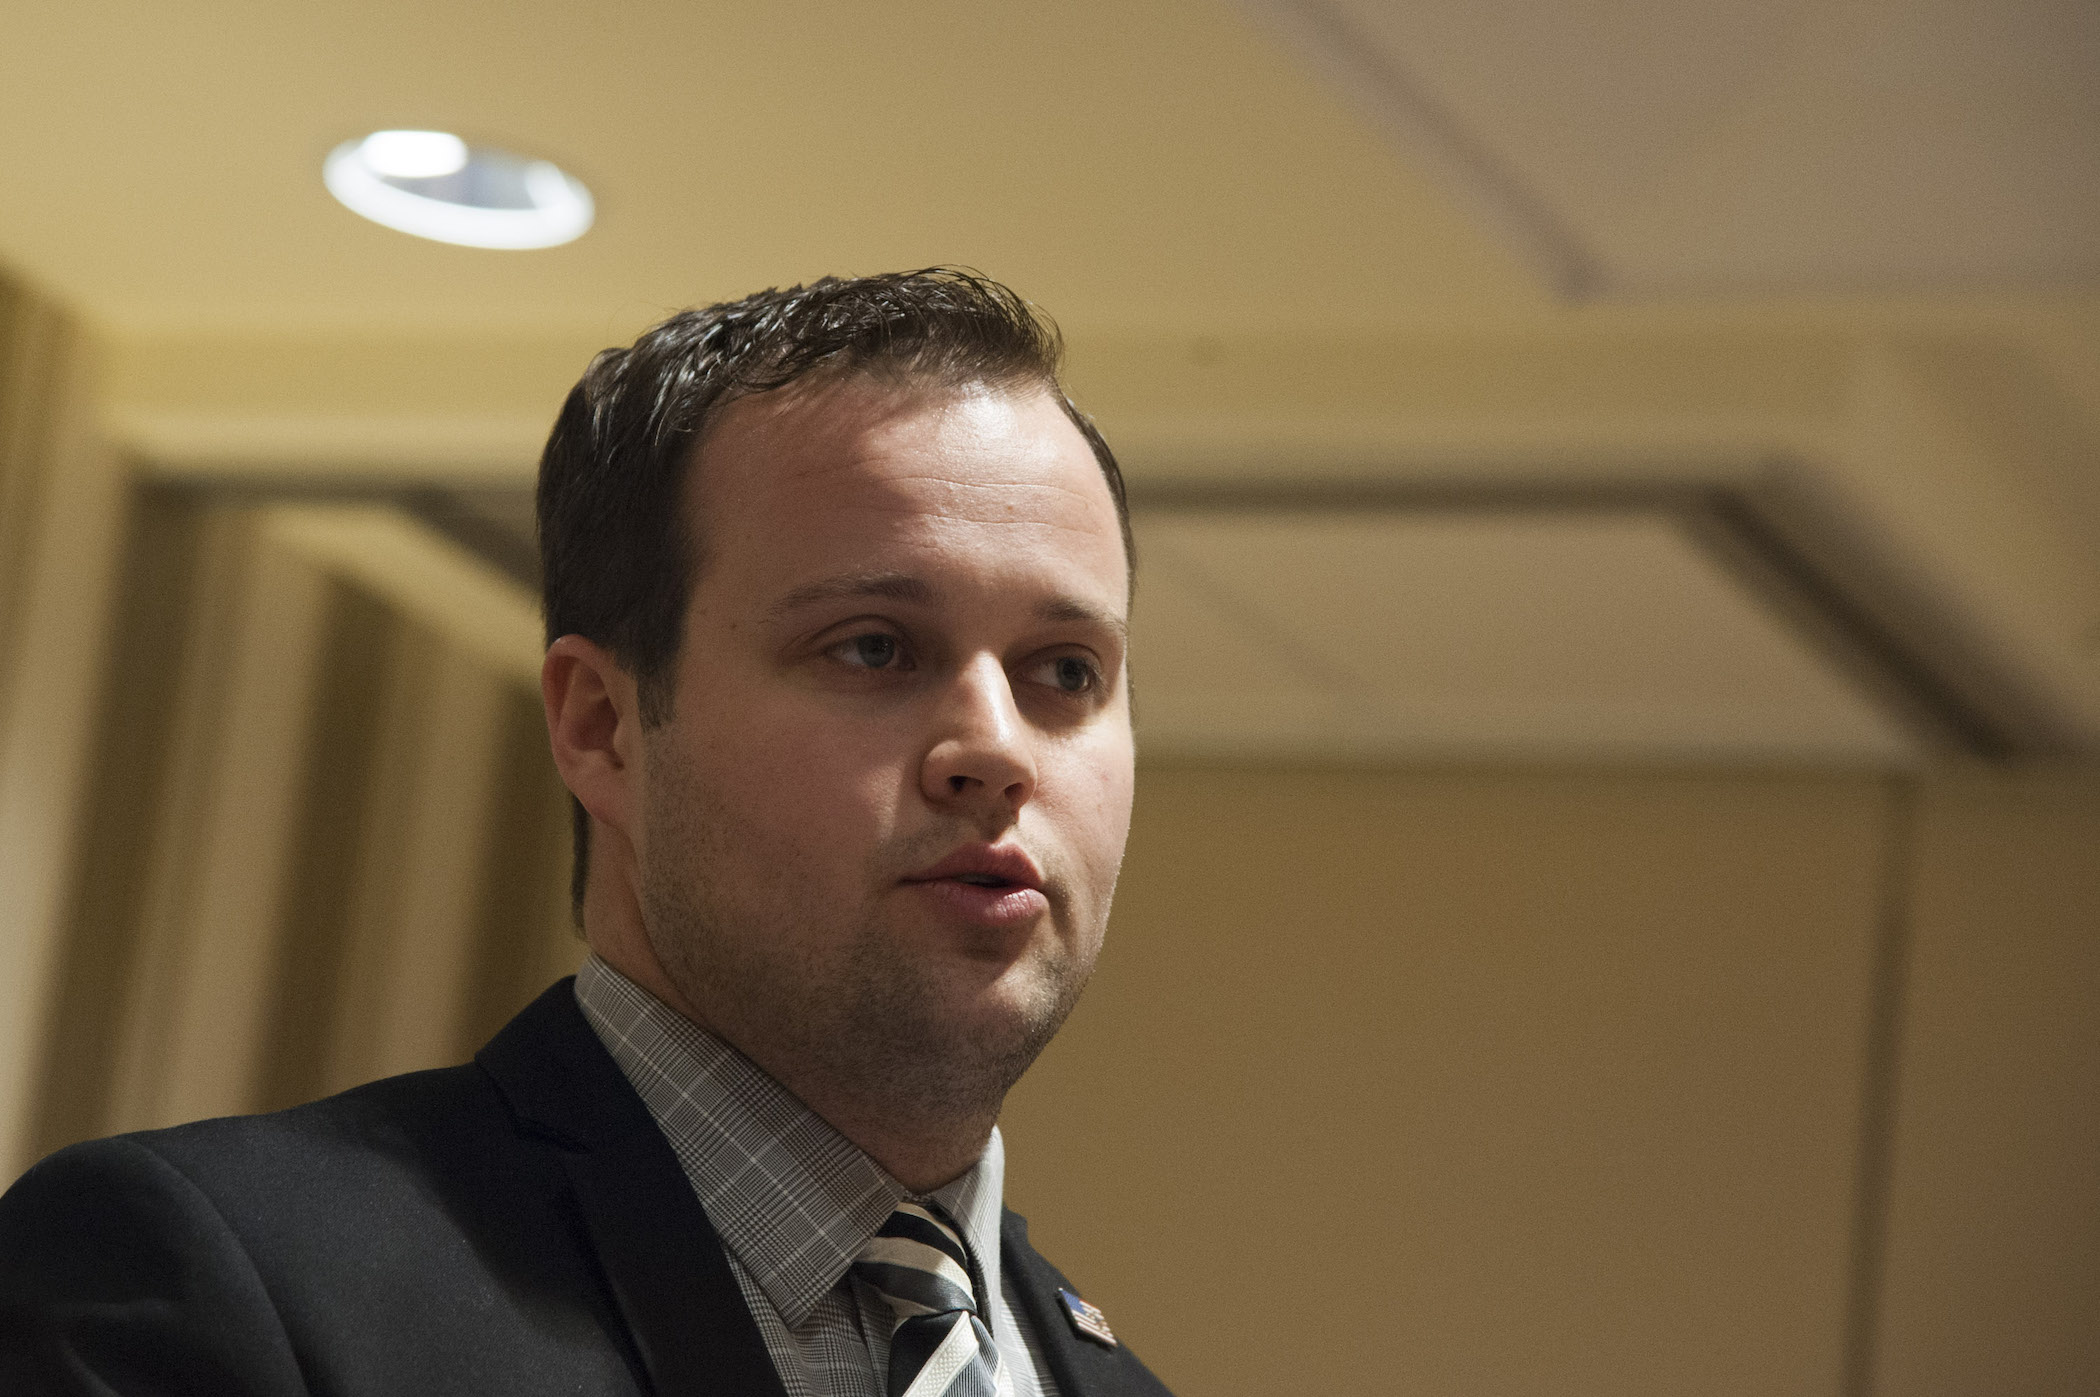 A close-up of Josh Duggar's face while he's speaking at an event